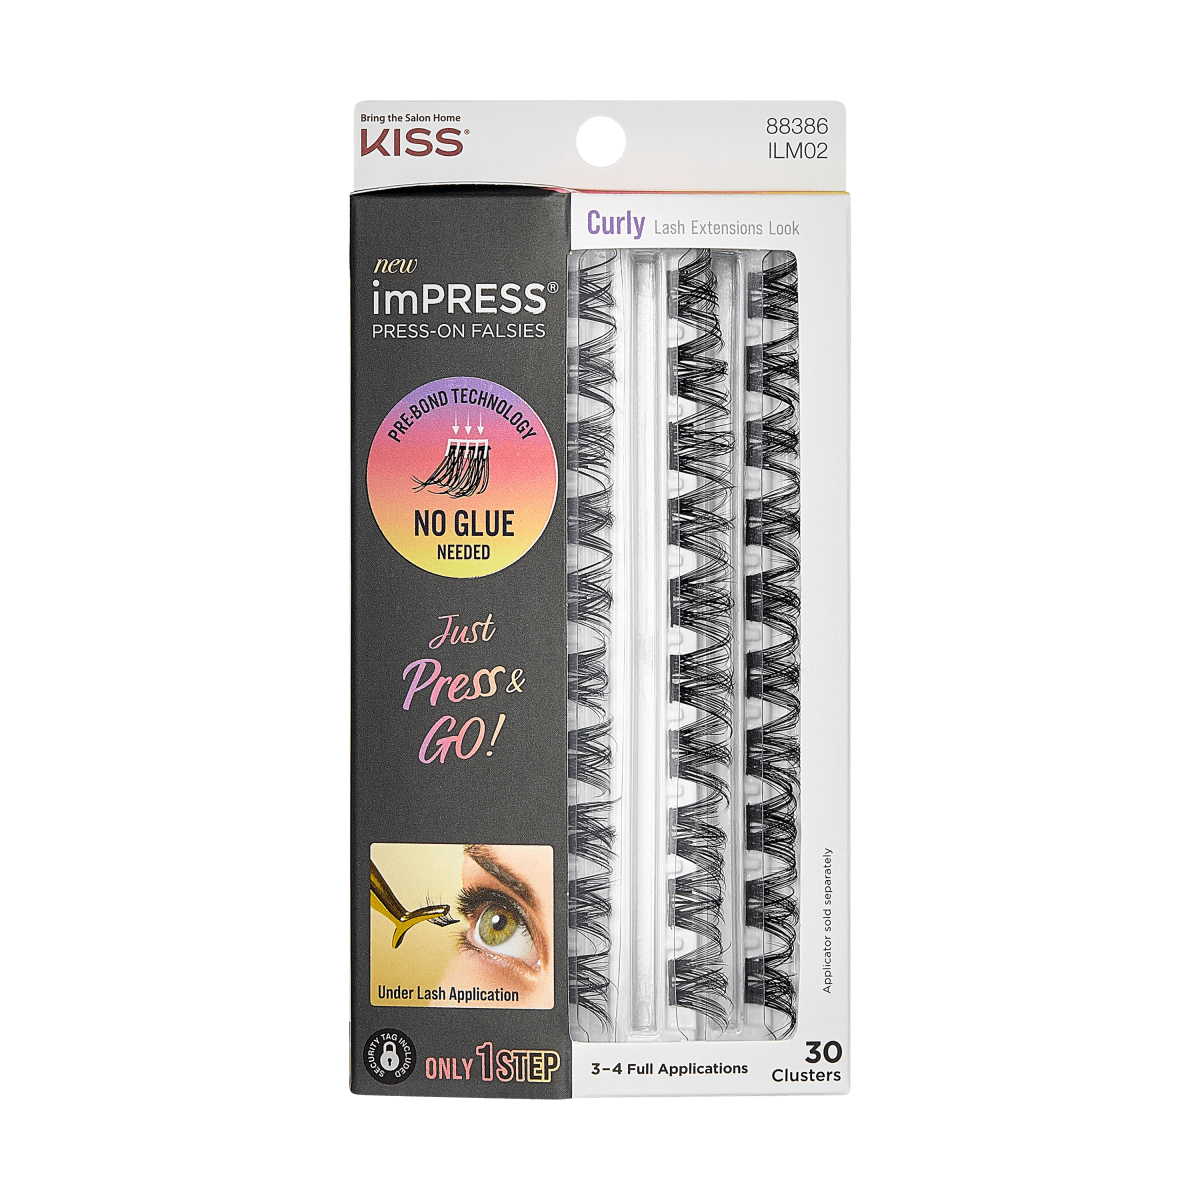 imPRESS Press-On Falsies Refills 30 Clusters - Curly